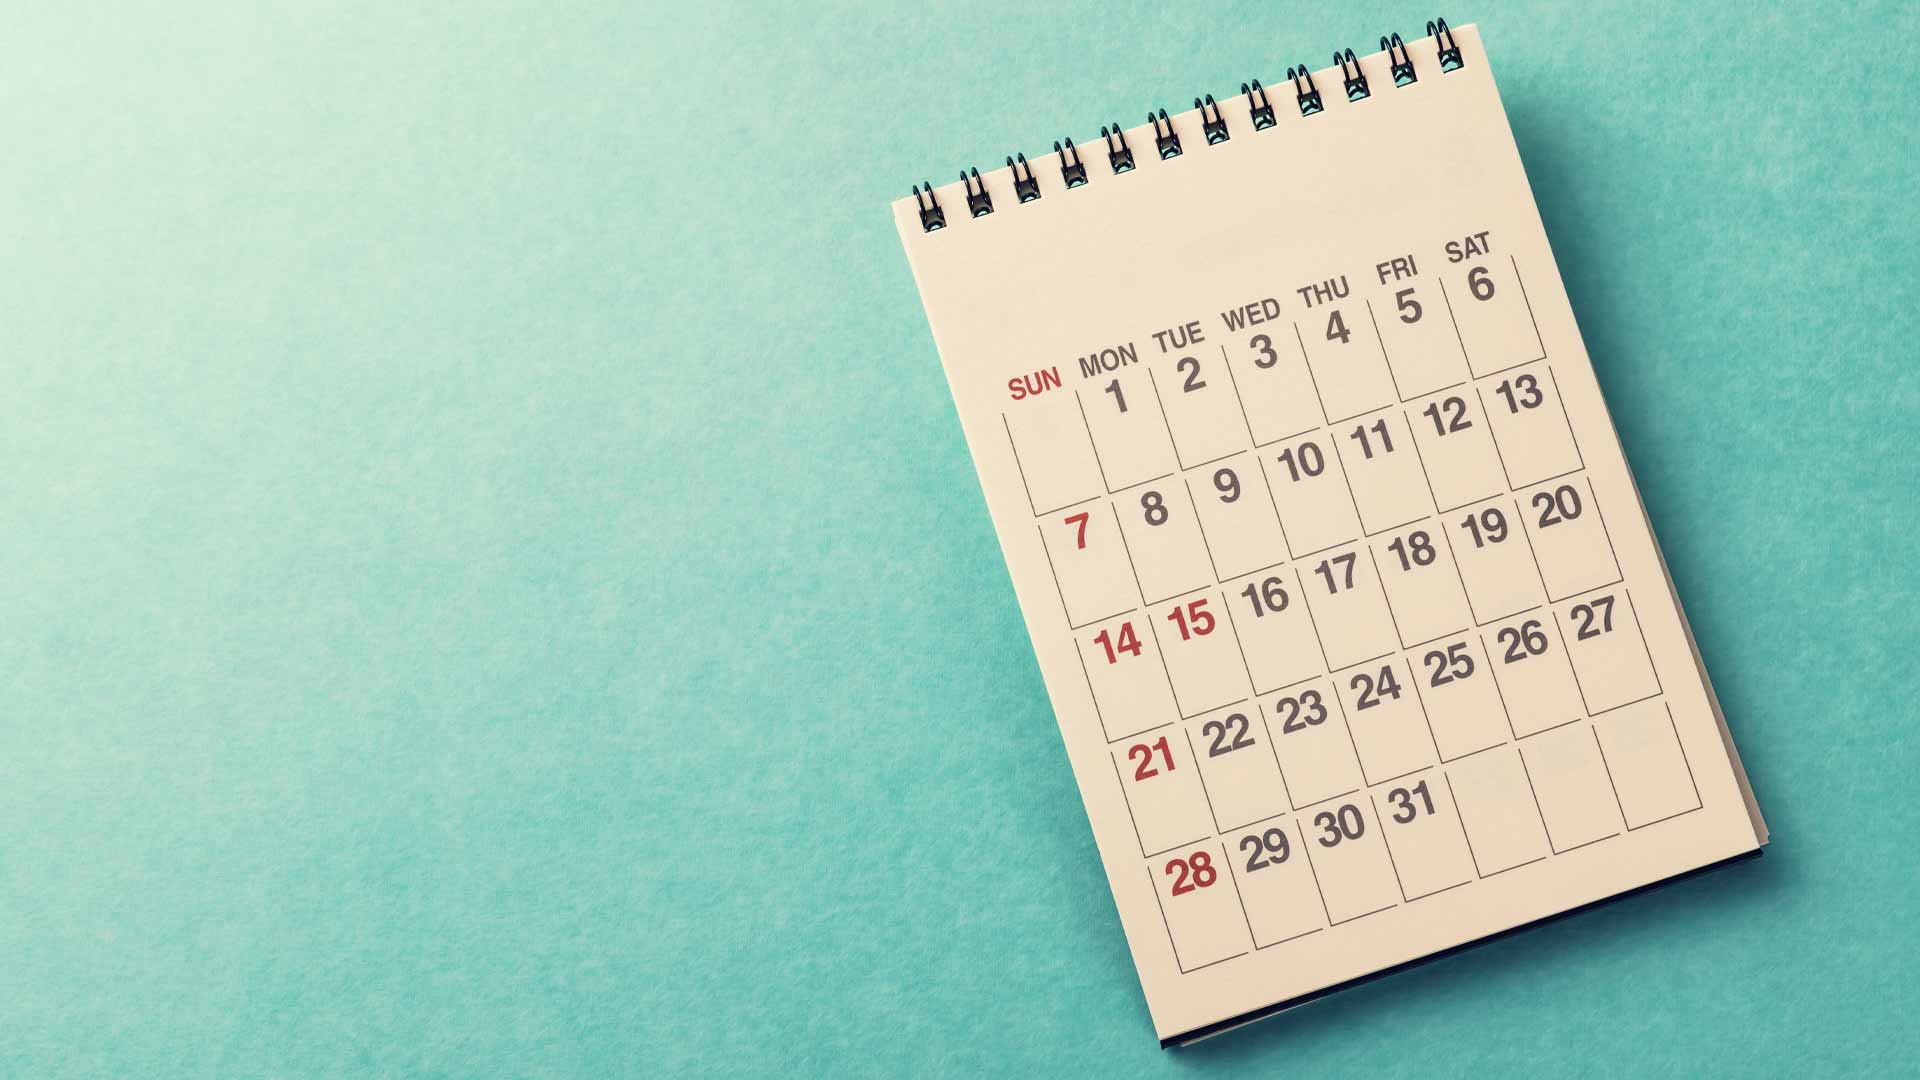 A calendar showing the days of a month